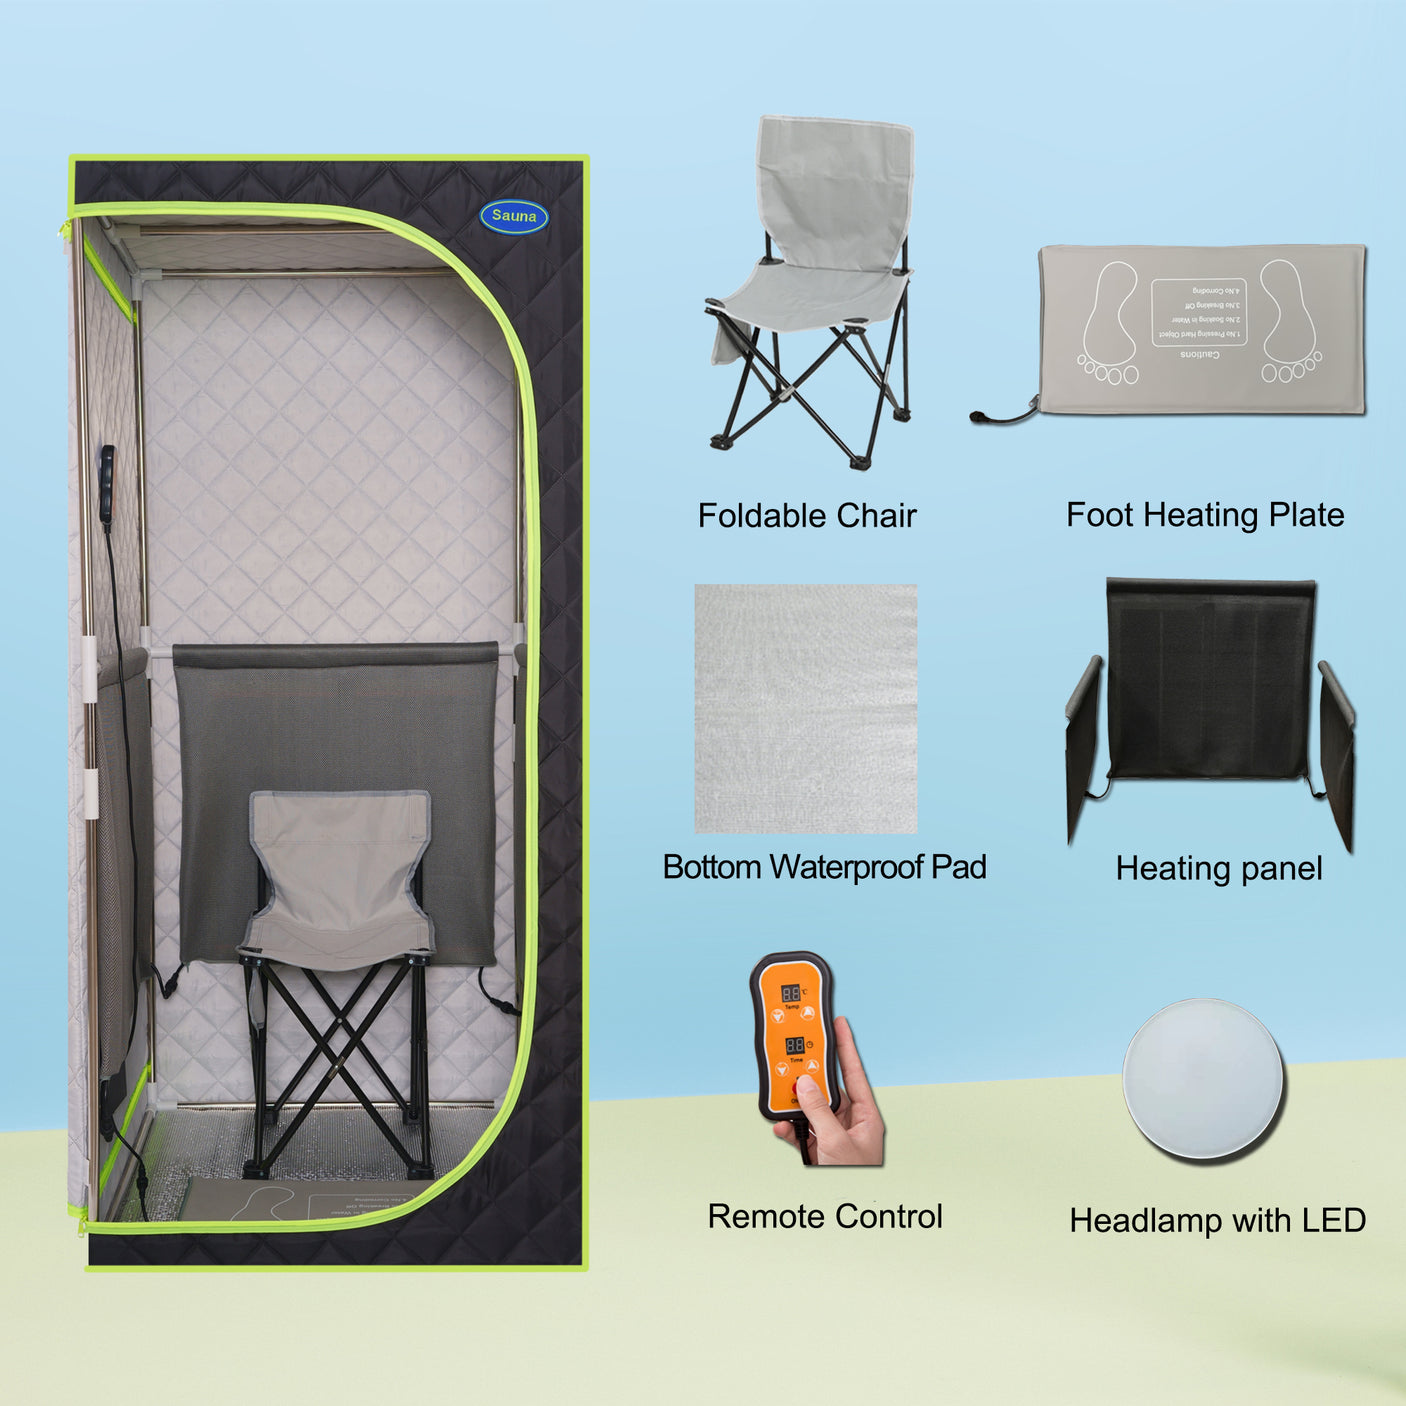 Portable Plus Type Full Size Far Infrared Sauna tent. Spa, Detox ,Therapy and Relaxation at home.Larger Space,Stainless Steel Pipes Connector Easy to Install, with FCC Certification--Black